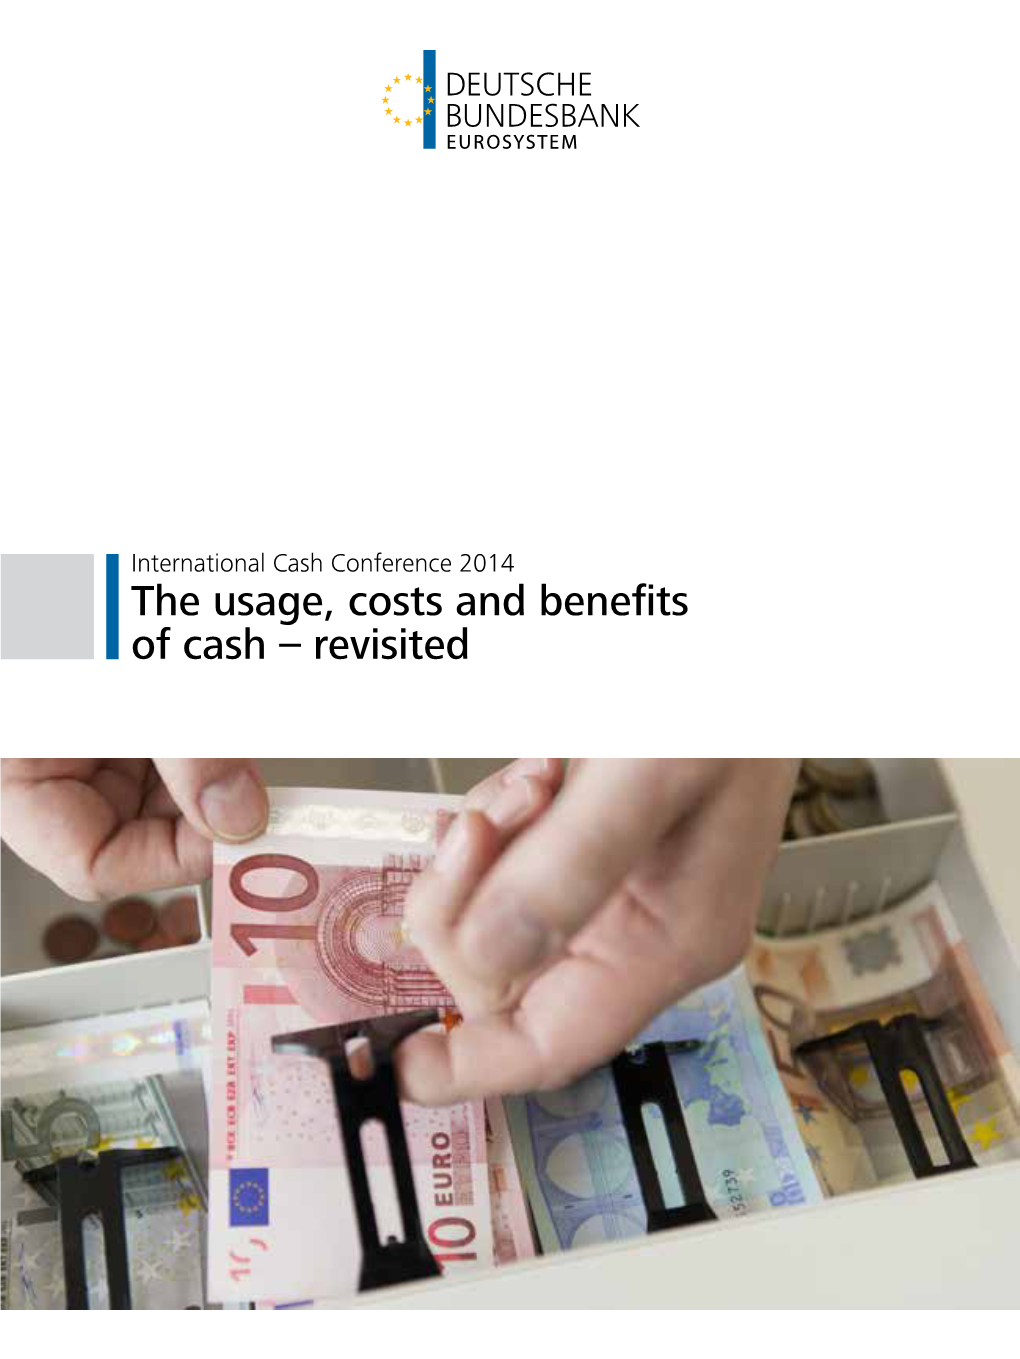 The Usage, Costs and Benefits of Cash